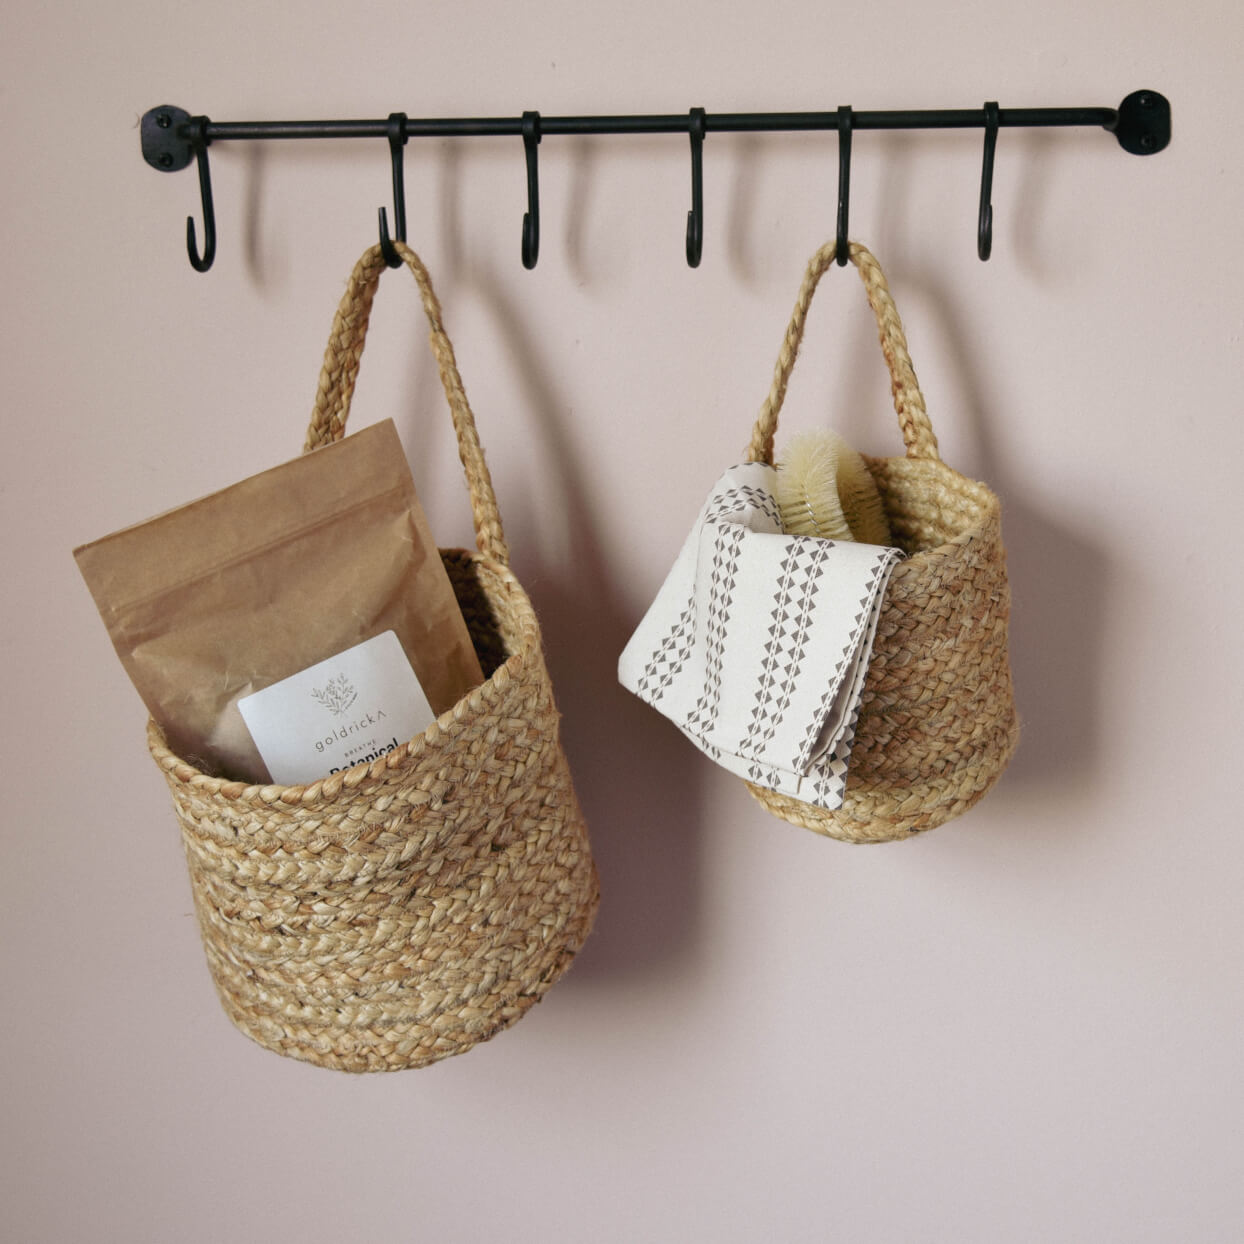 Pair of single handled Baskets on hook rail holding household items